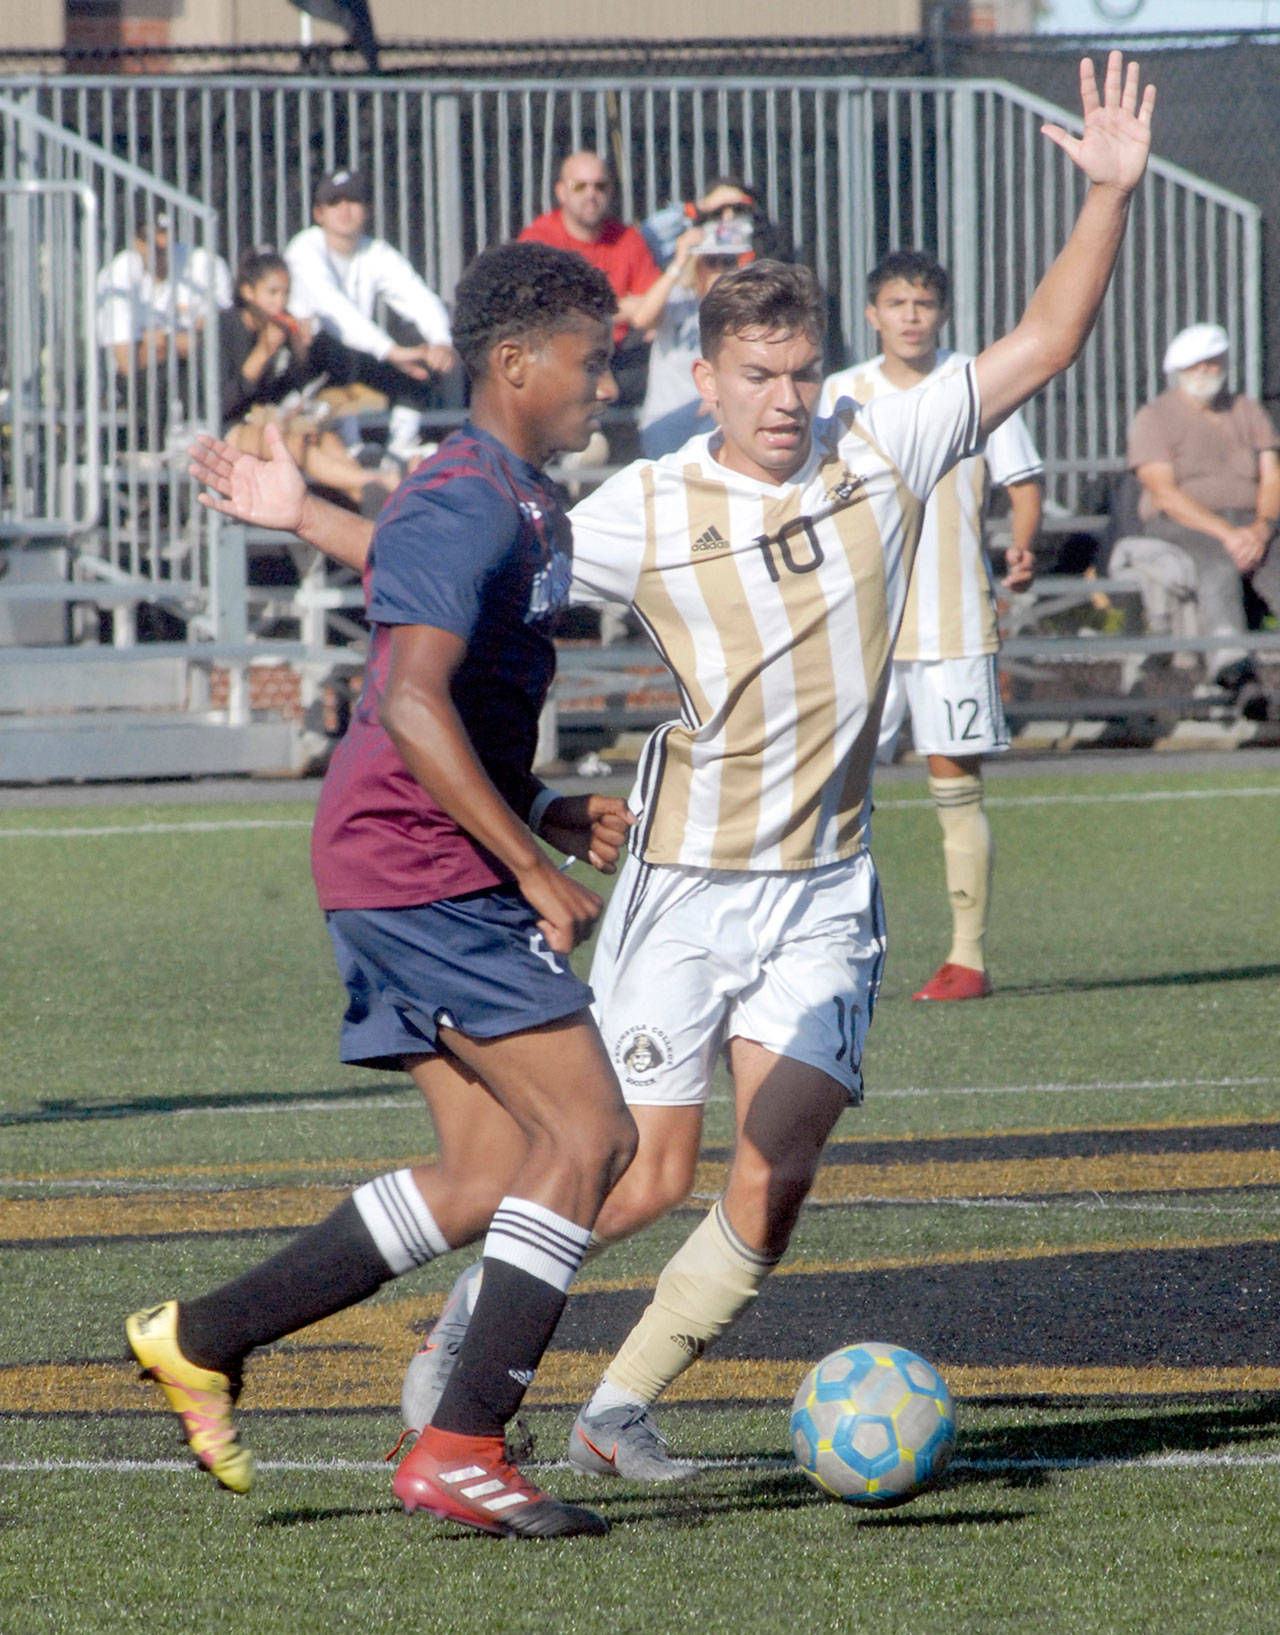 Peninsula’s Mason Haubrich, right, battles for control with Whatcom’s Musab Bwana in September 2019 at Wally Sigmar Field in Port Angeles. Because of the ongoing COVID-19 pandemic, the Northwest Athletic Conference postponed the start of the college soccer season until spring 2021. (Keith Thorpe/Peninsula Daily News)